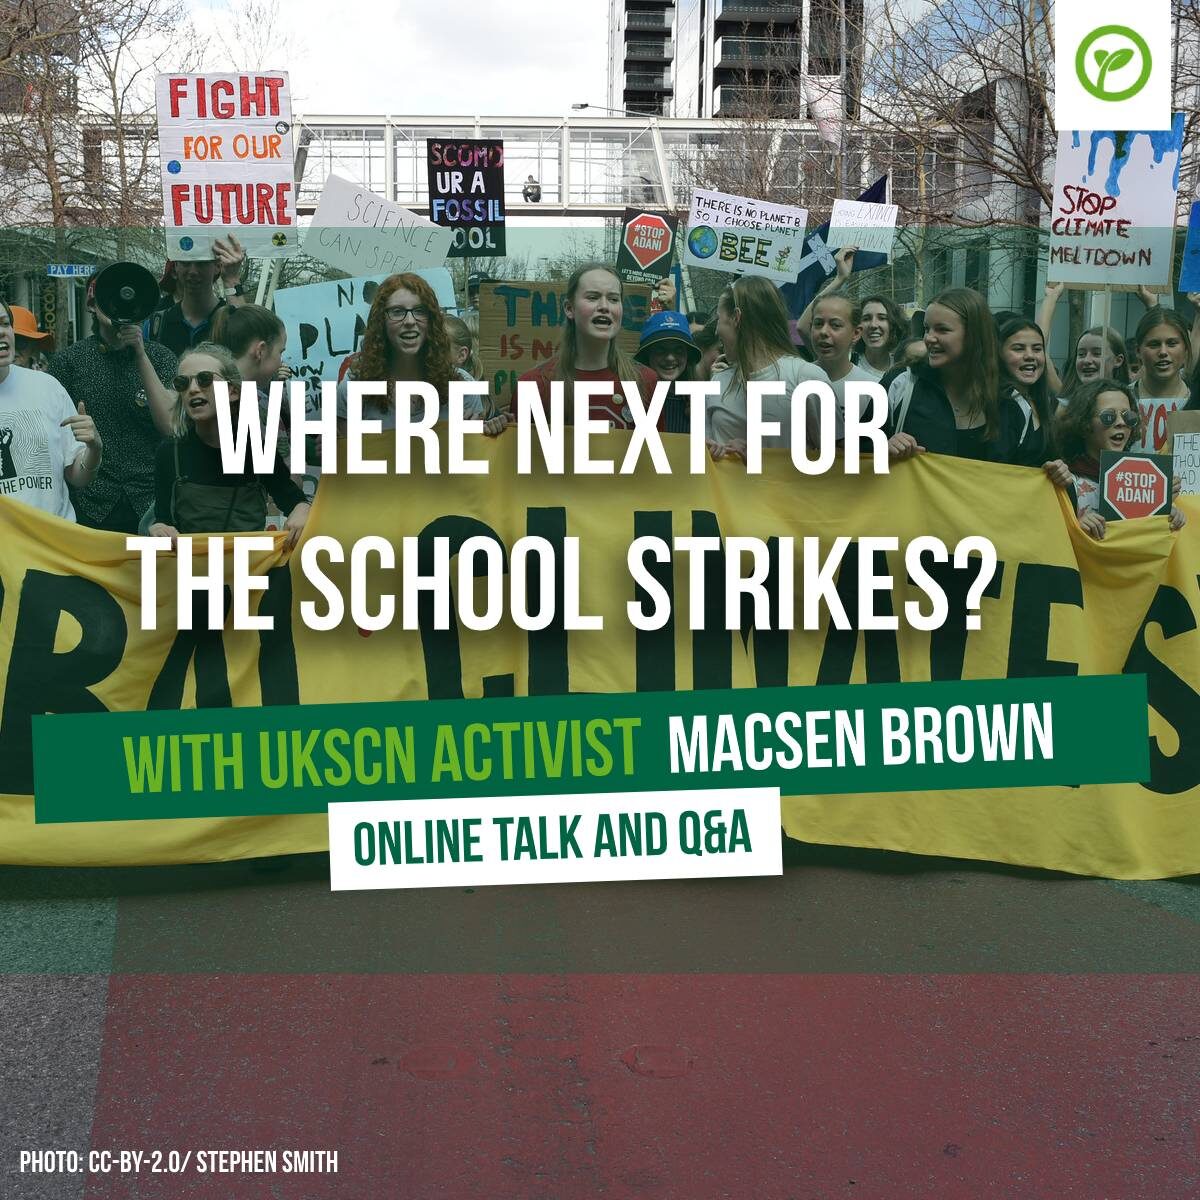 Where next for the school strikes? With UKSCN activist Macsen Brown. Online talk and Q&A. Photo: CC-BY-2.0/Stephen Smith